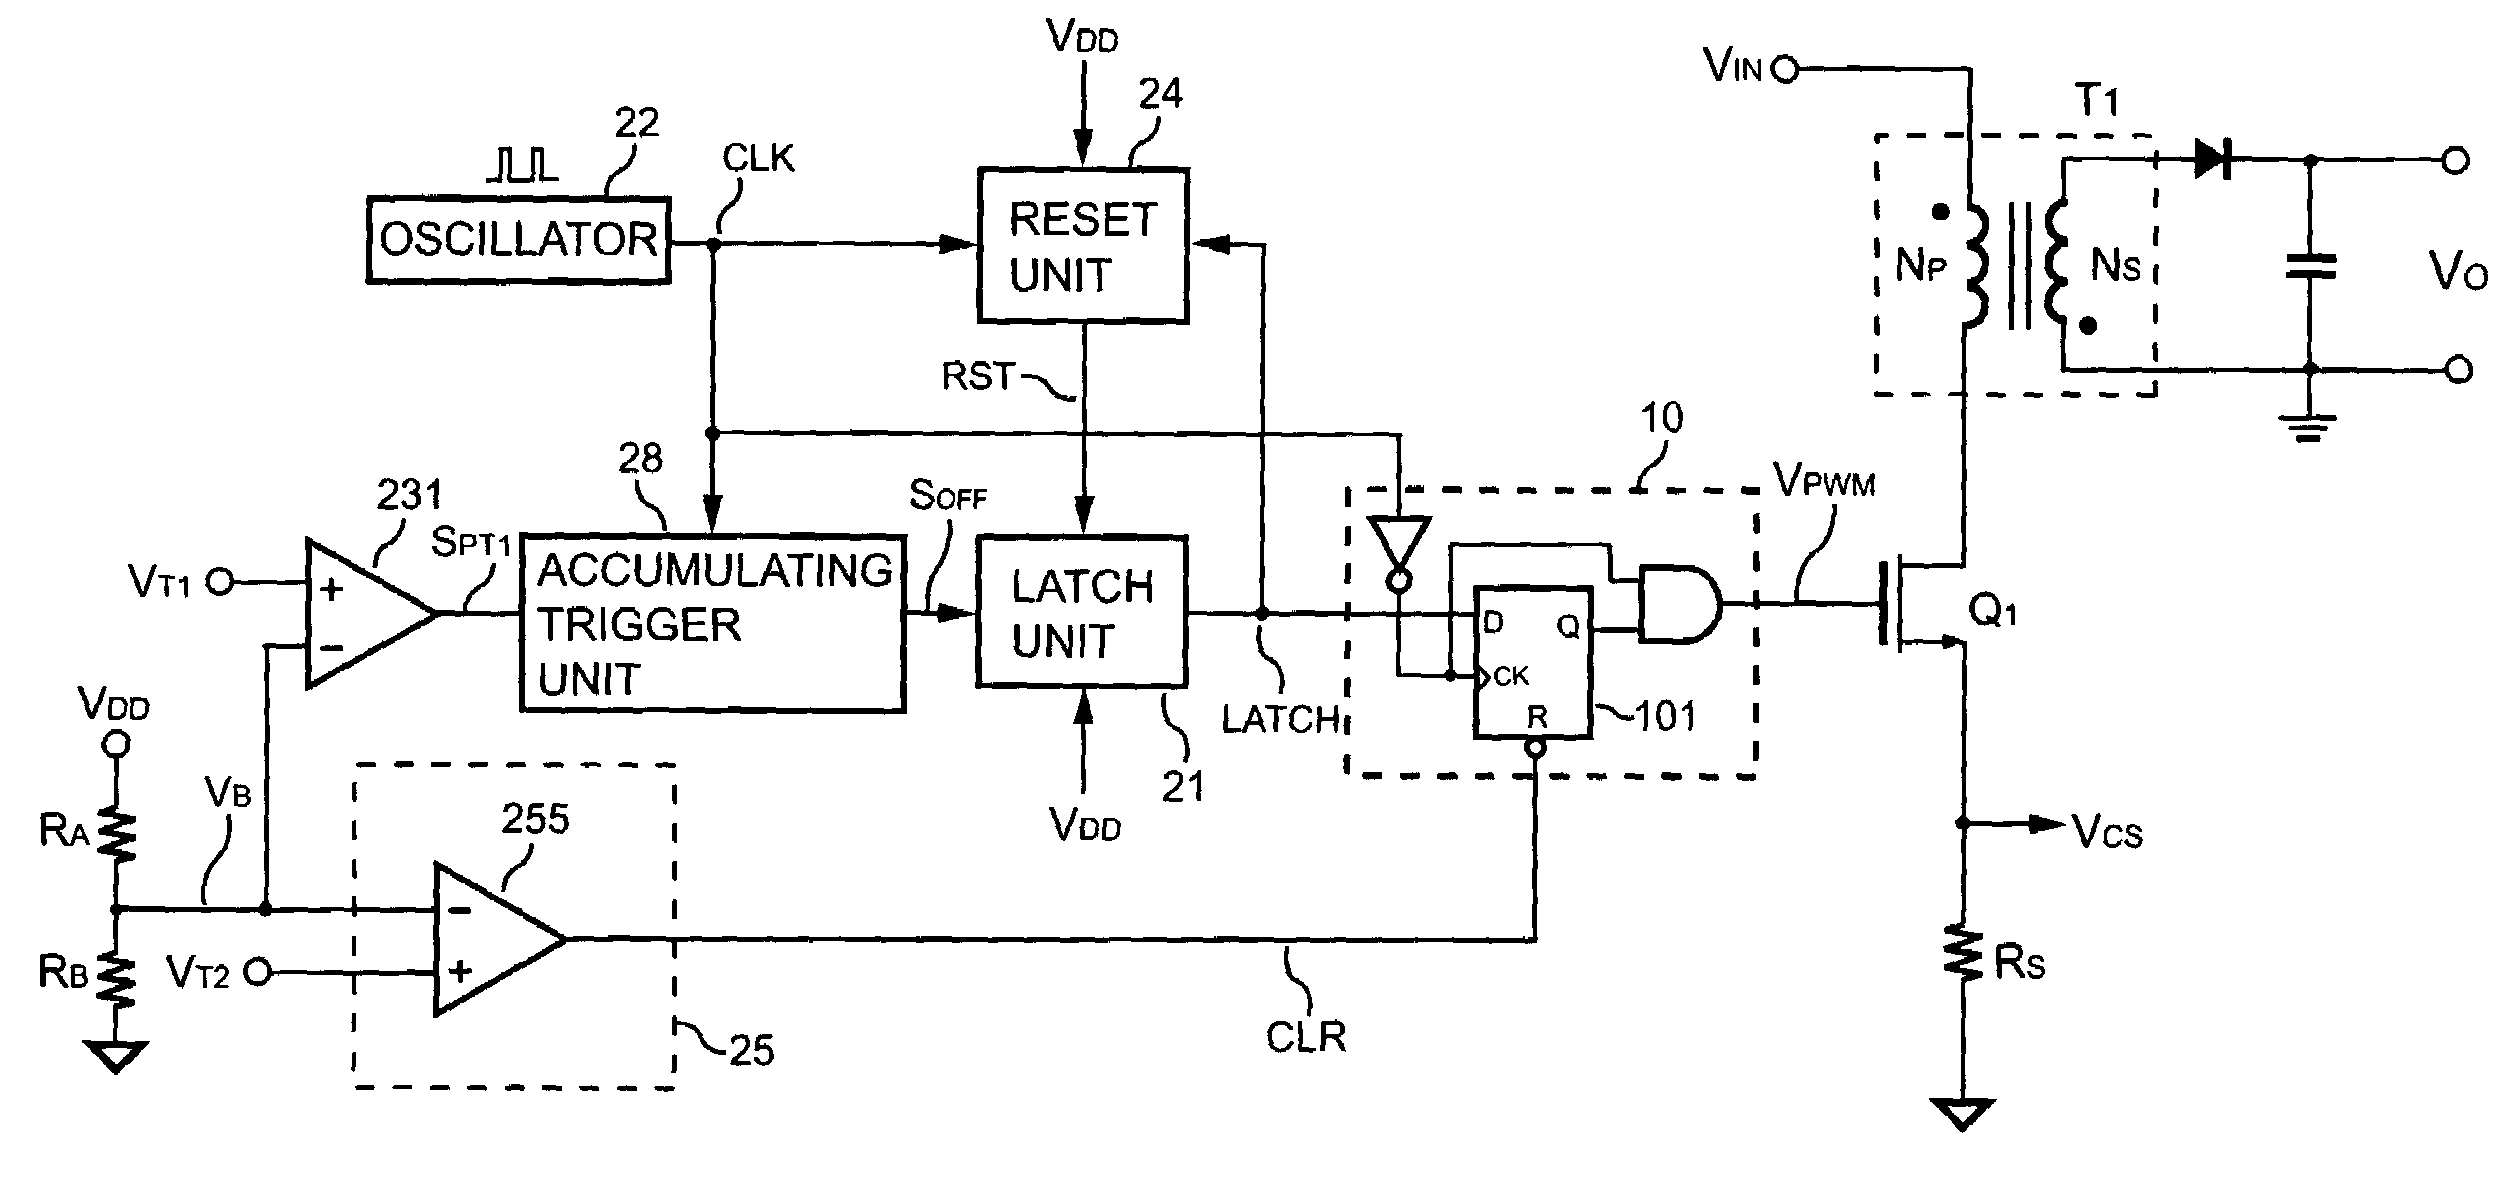 Over-voltage protection circuit for power converter